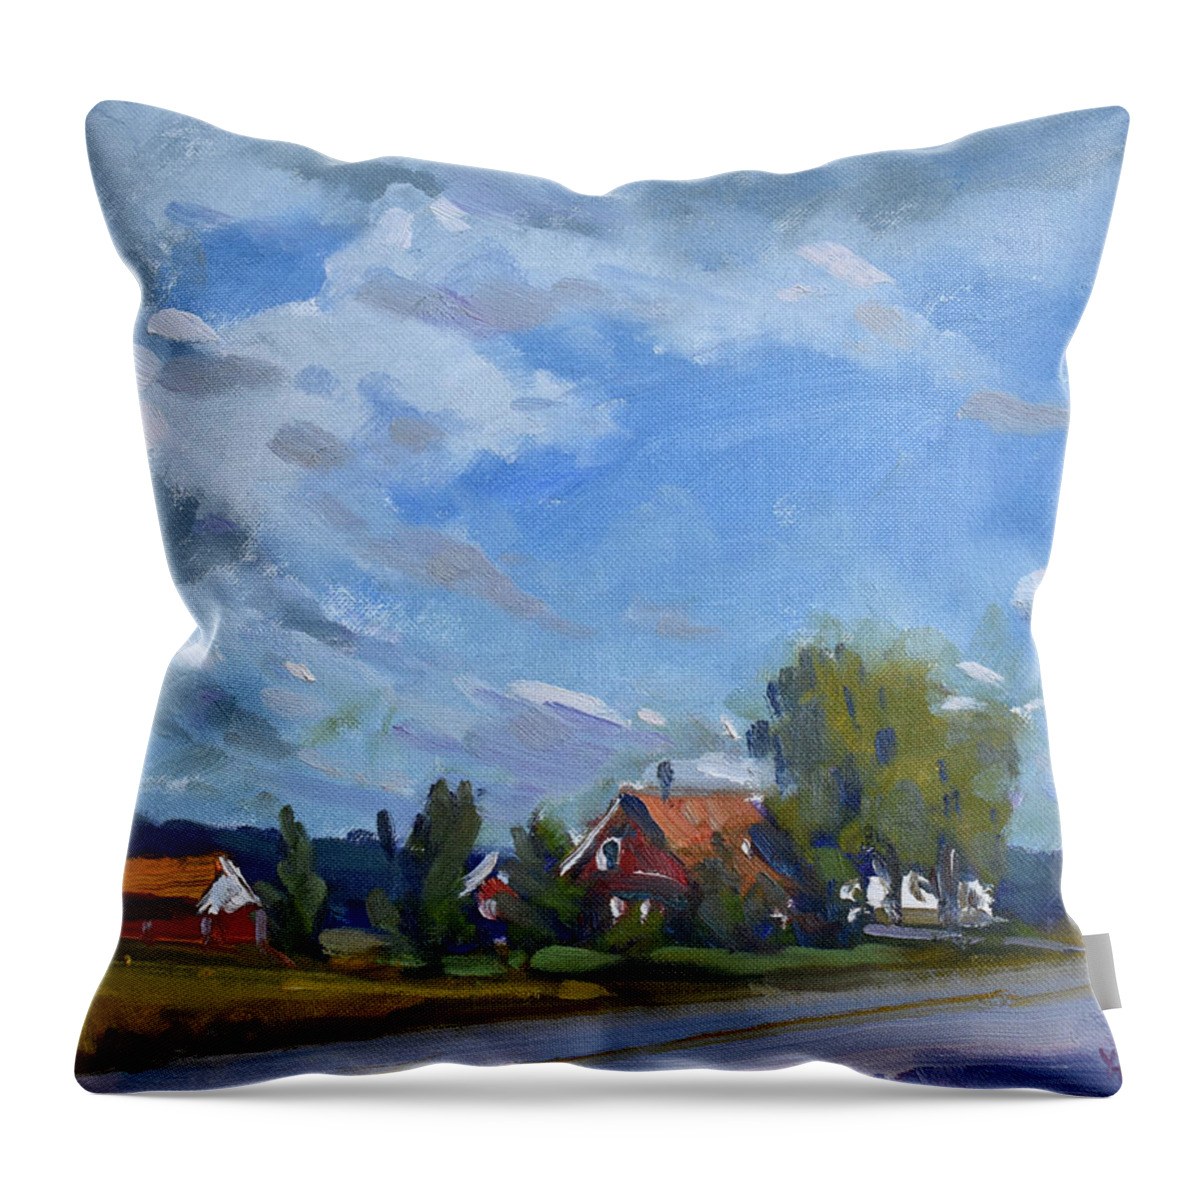 Cloudy Day Throw Pillow featuring the painting Clowdy Day by Ylli Haruni